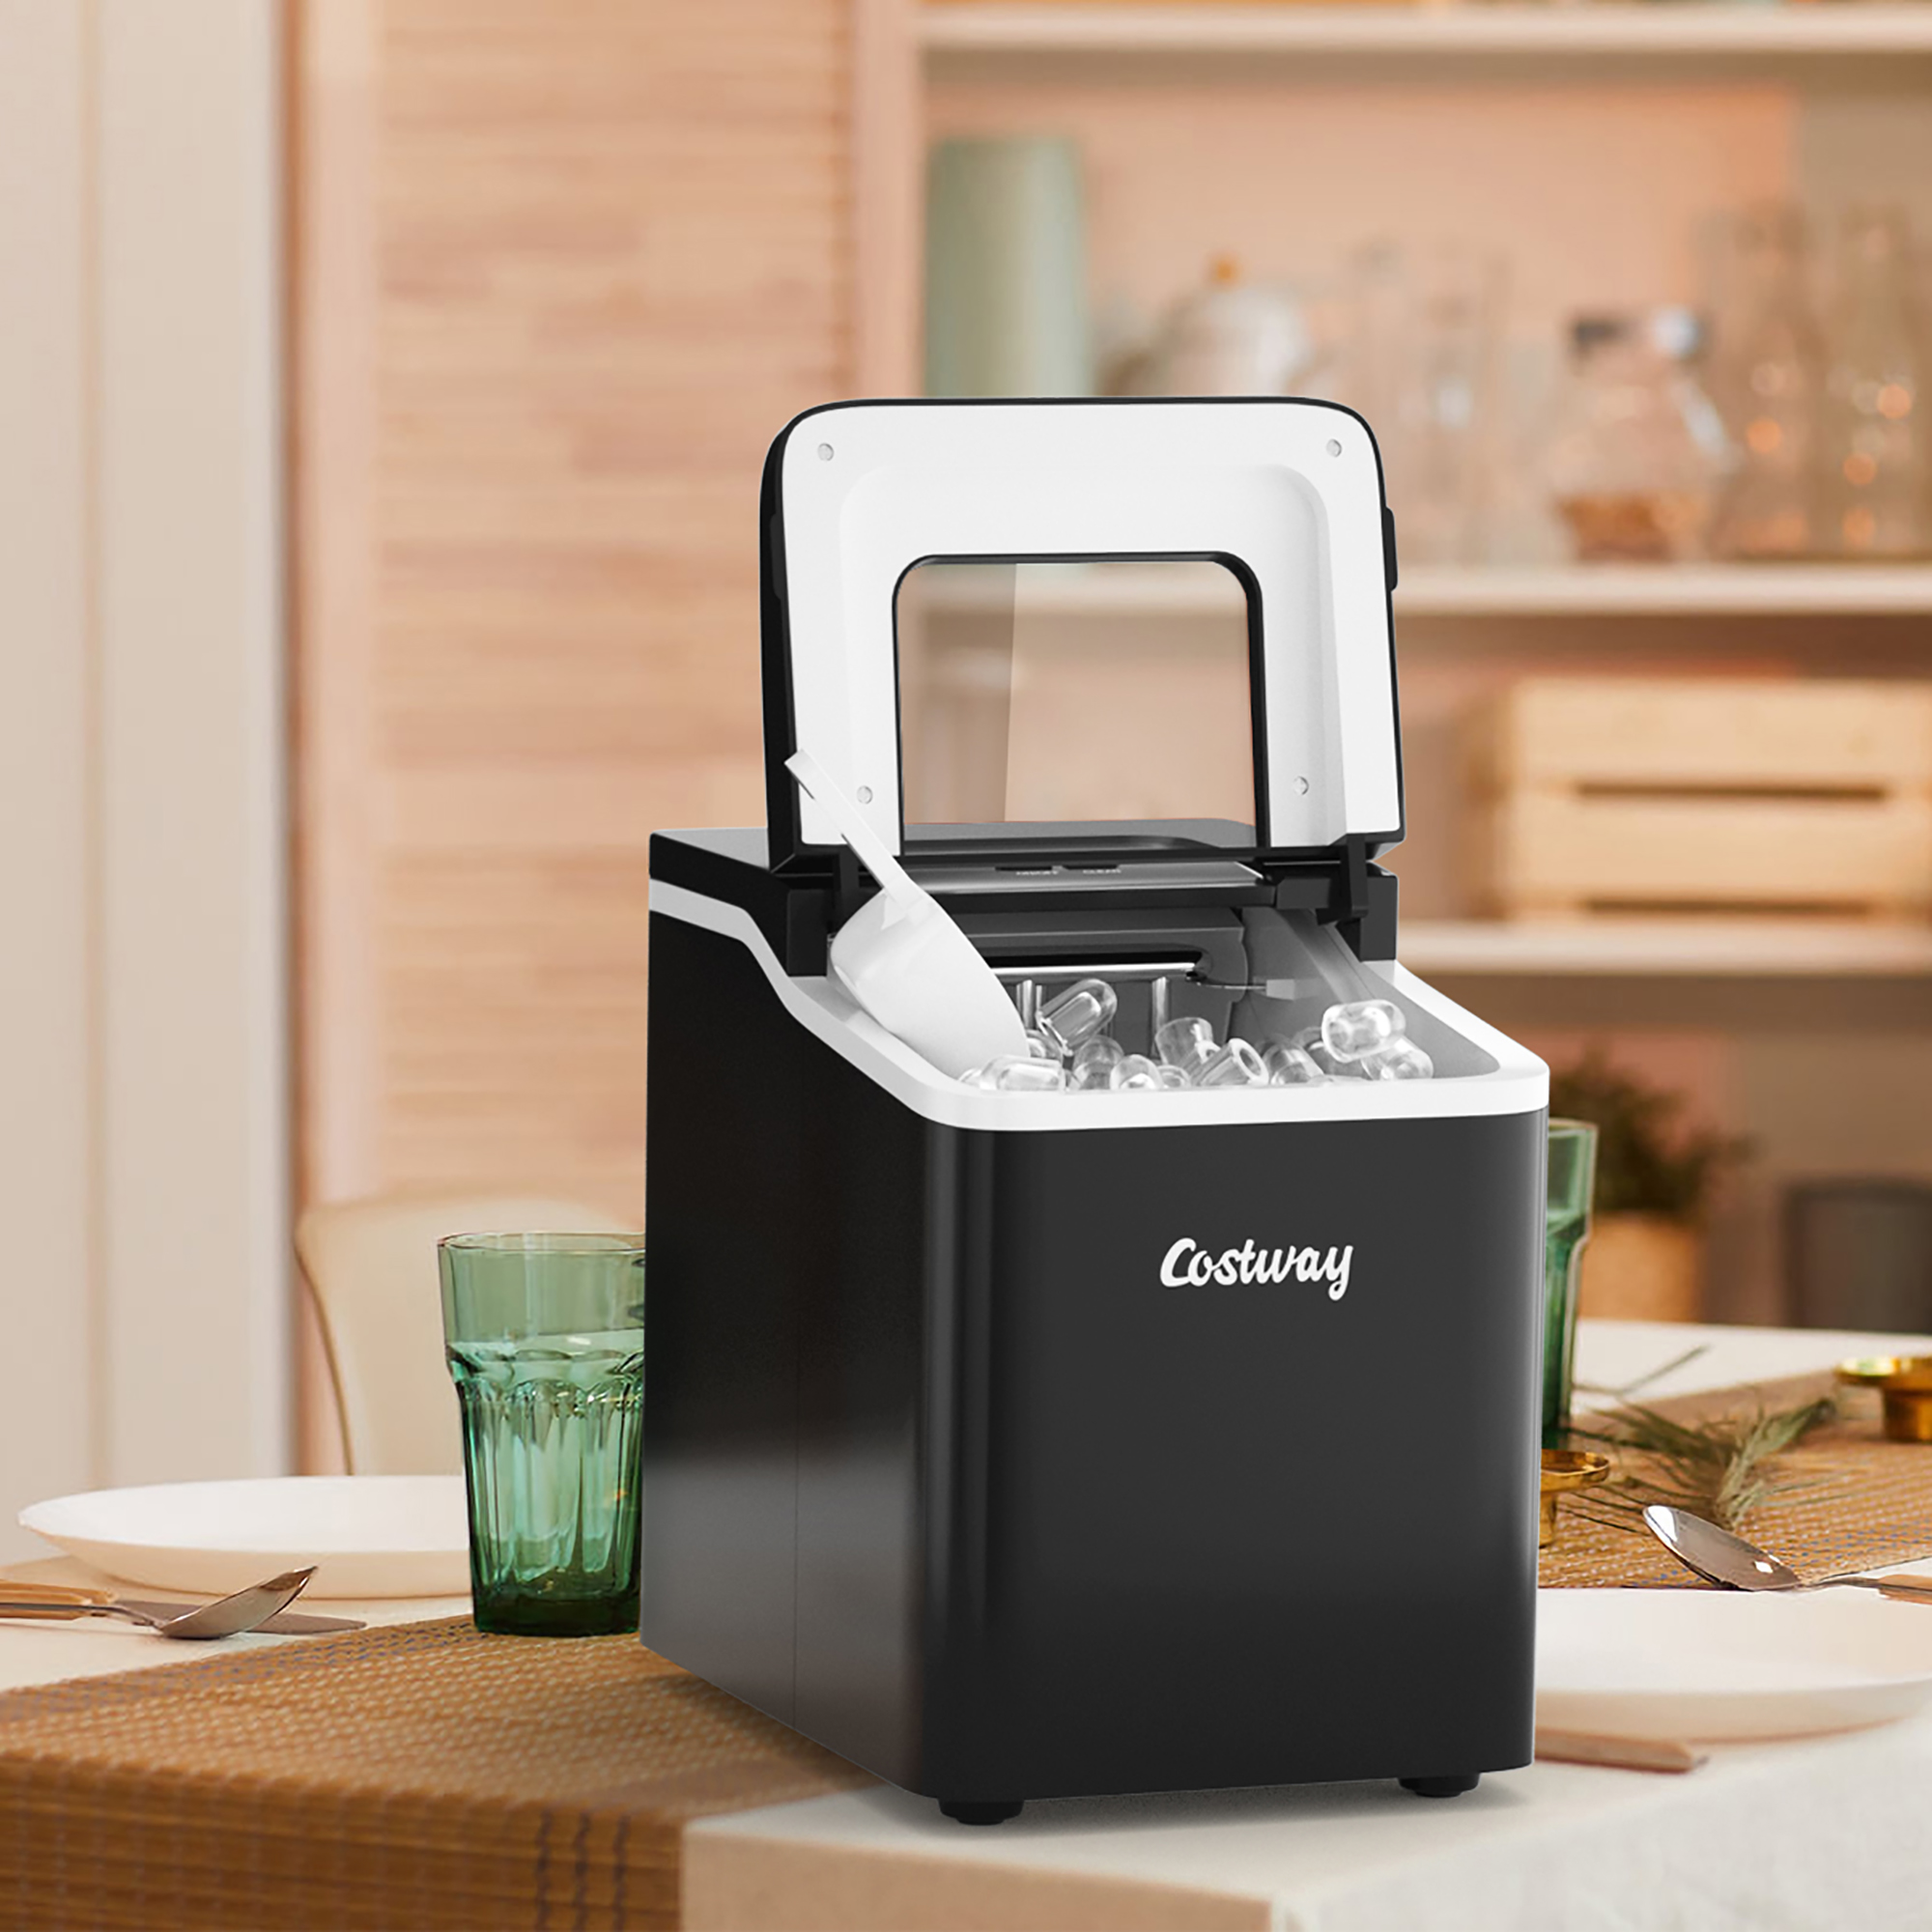 Costway Portable Ice Maker Machine Countertop 26Lbs/24H Self-cleaning w/ Scoop Black - image 2 of 10